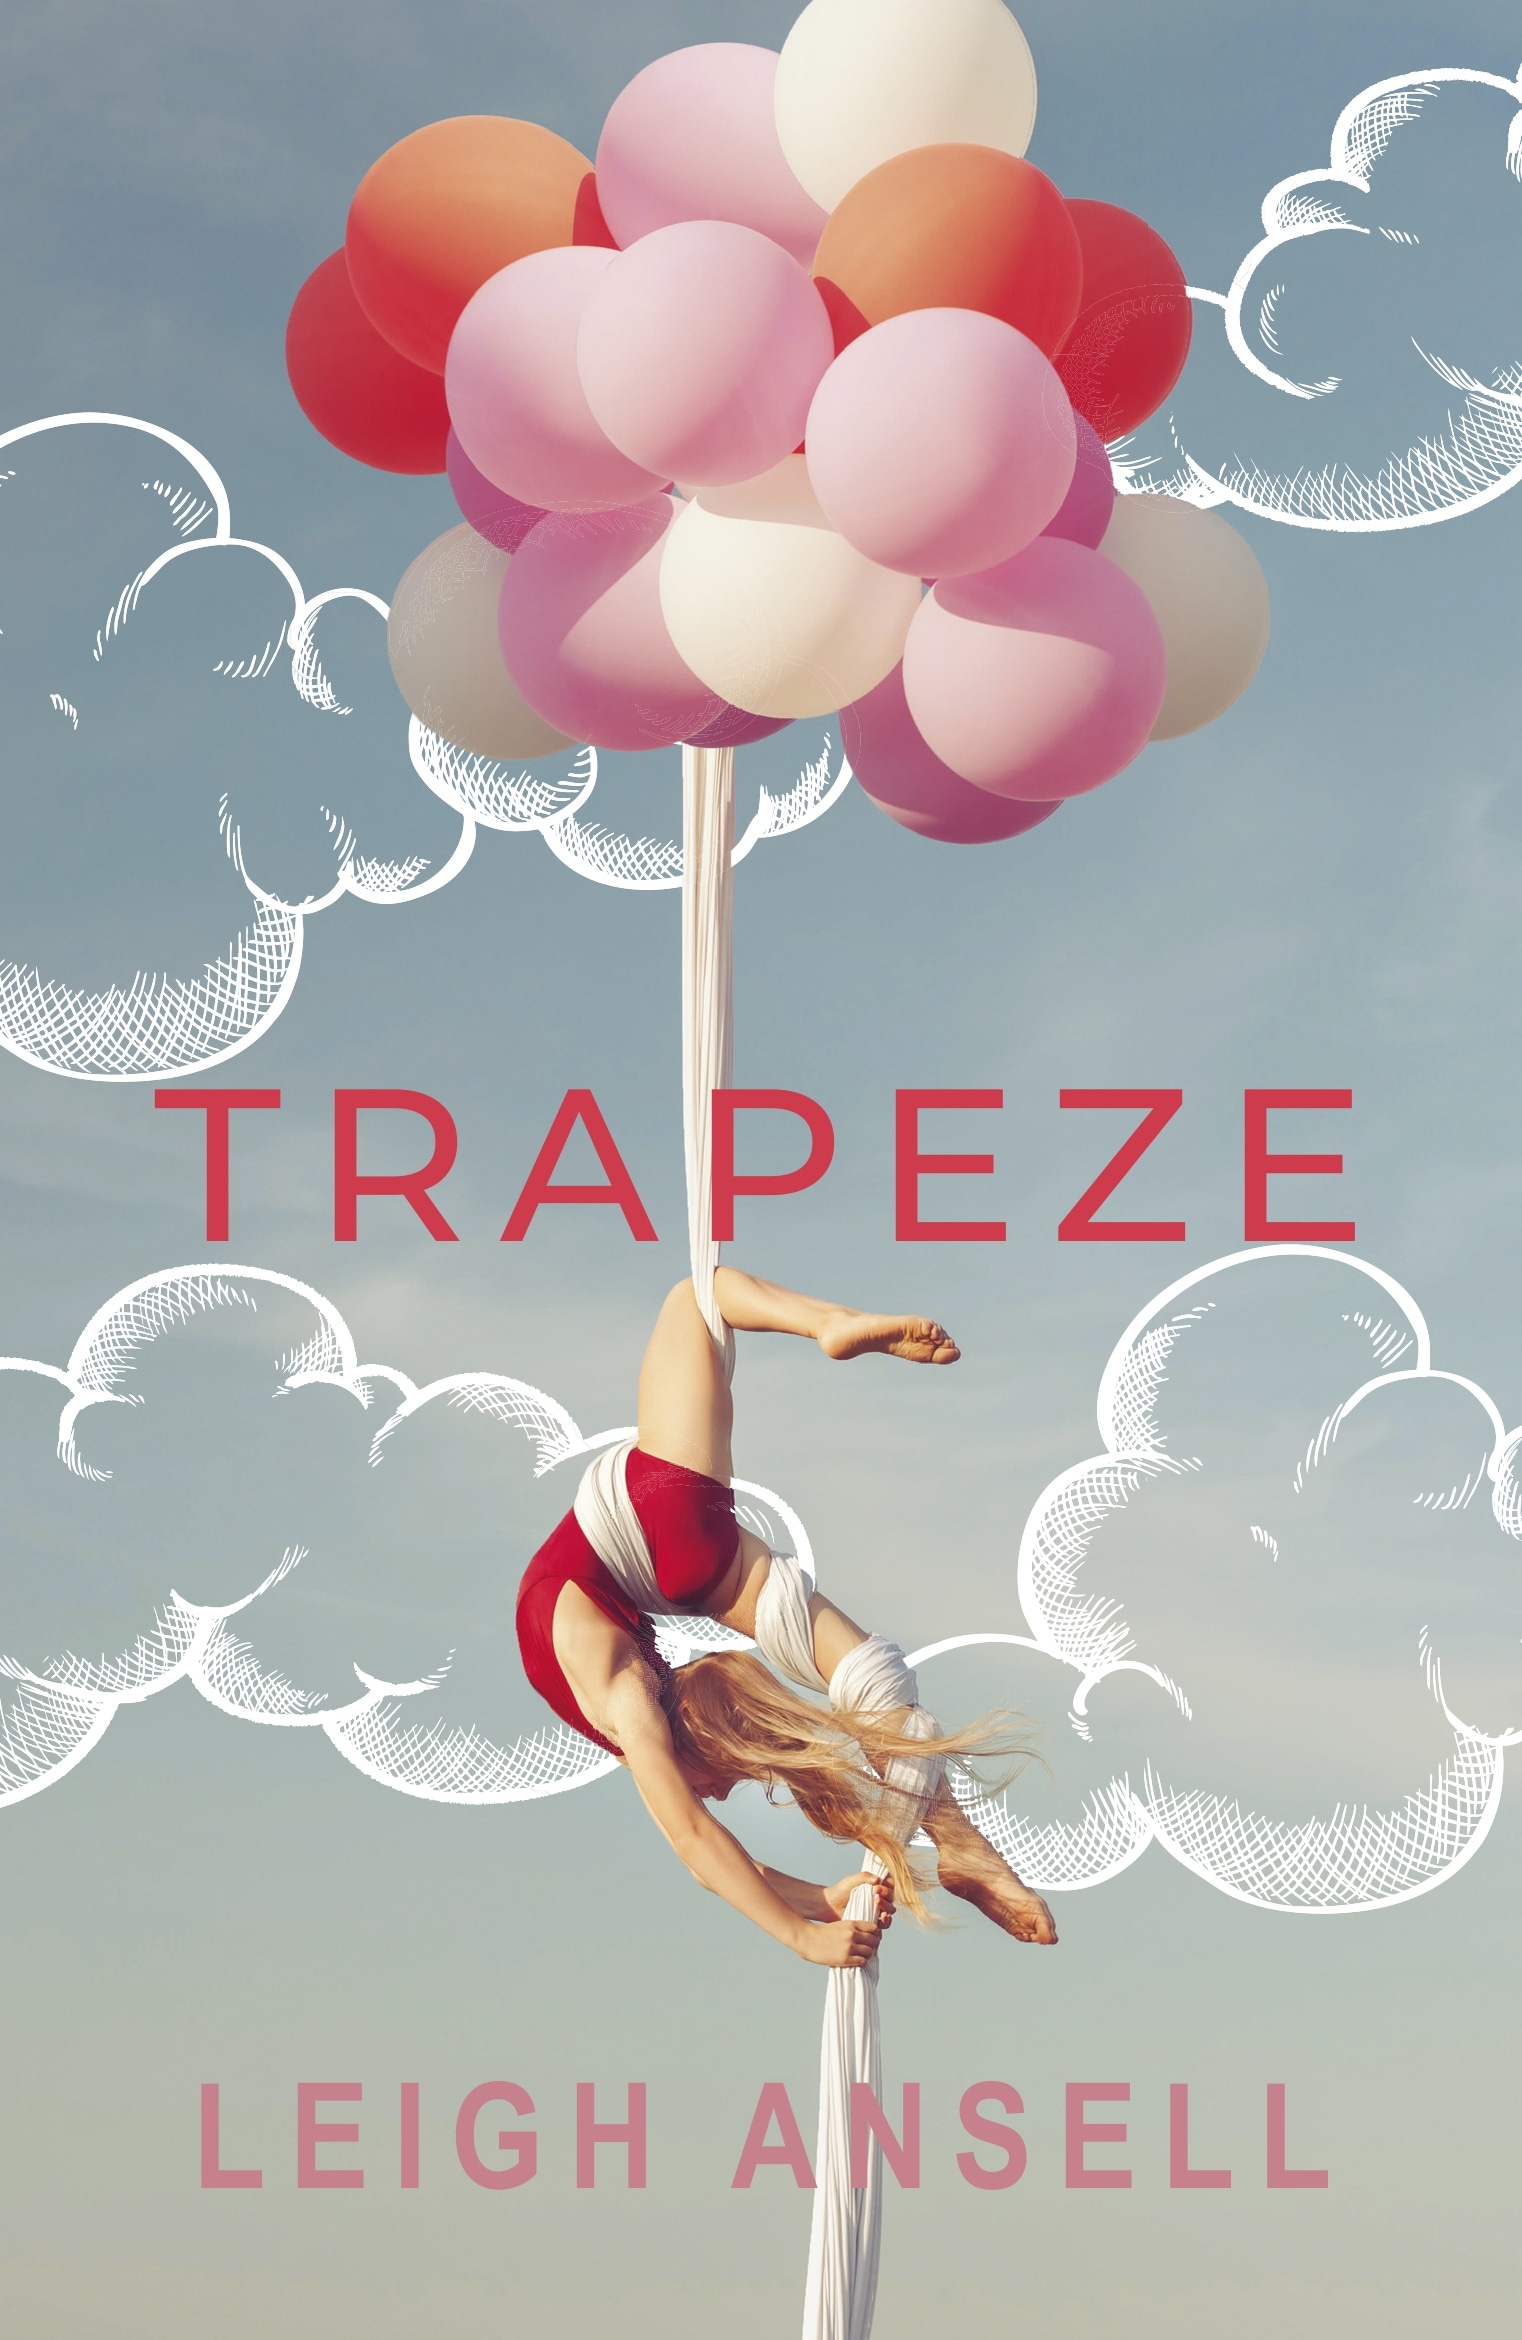 Book “Trapeze” by Leigh Ansell — September 19, 2019